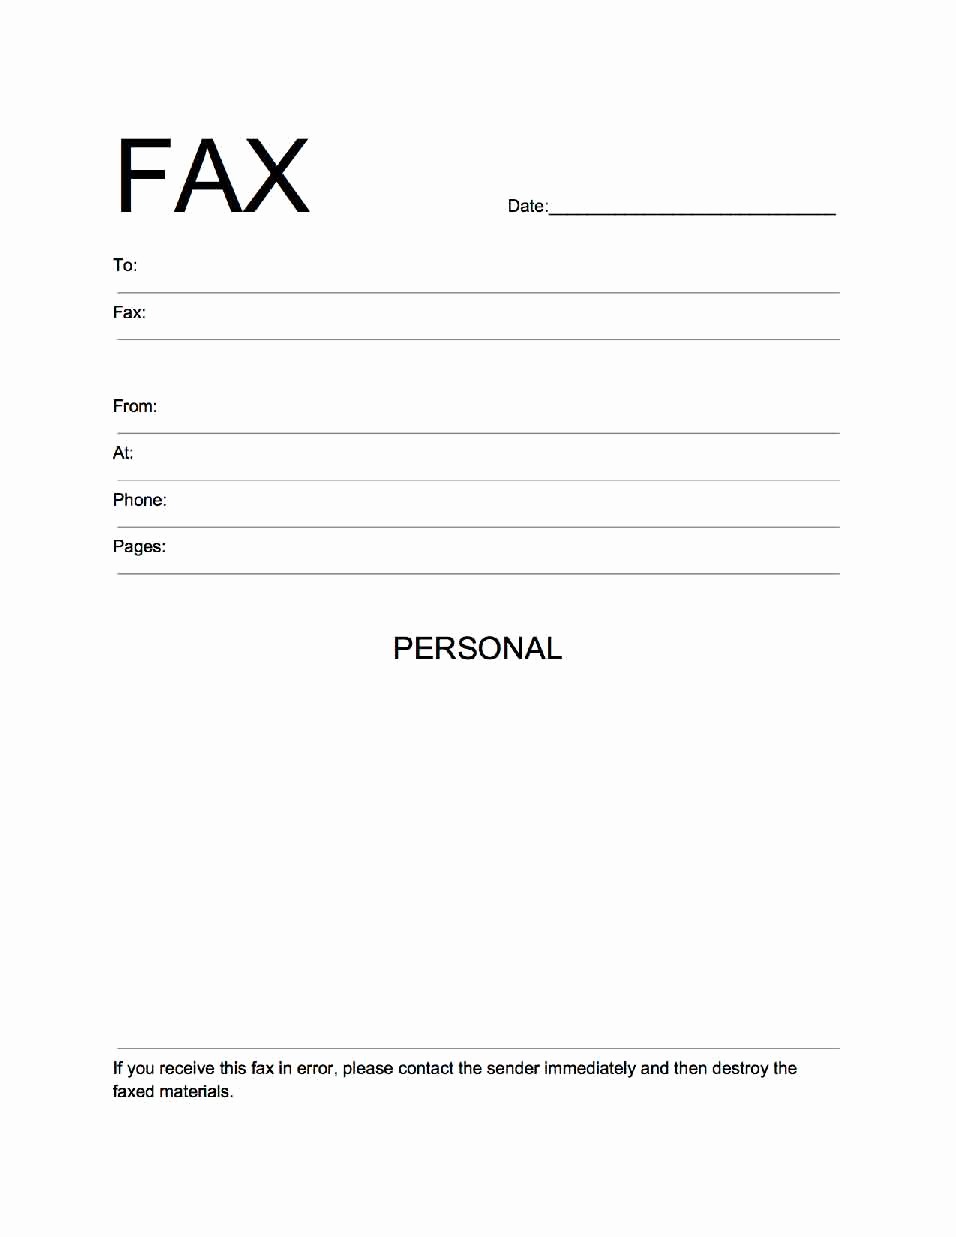 Free Fax Cover Letter Template Luxury Free Fax Cover Sheet Template Download